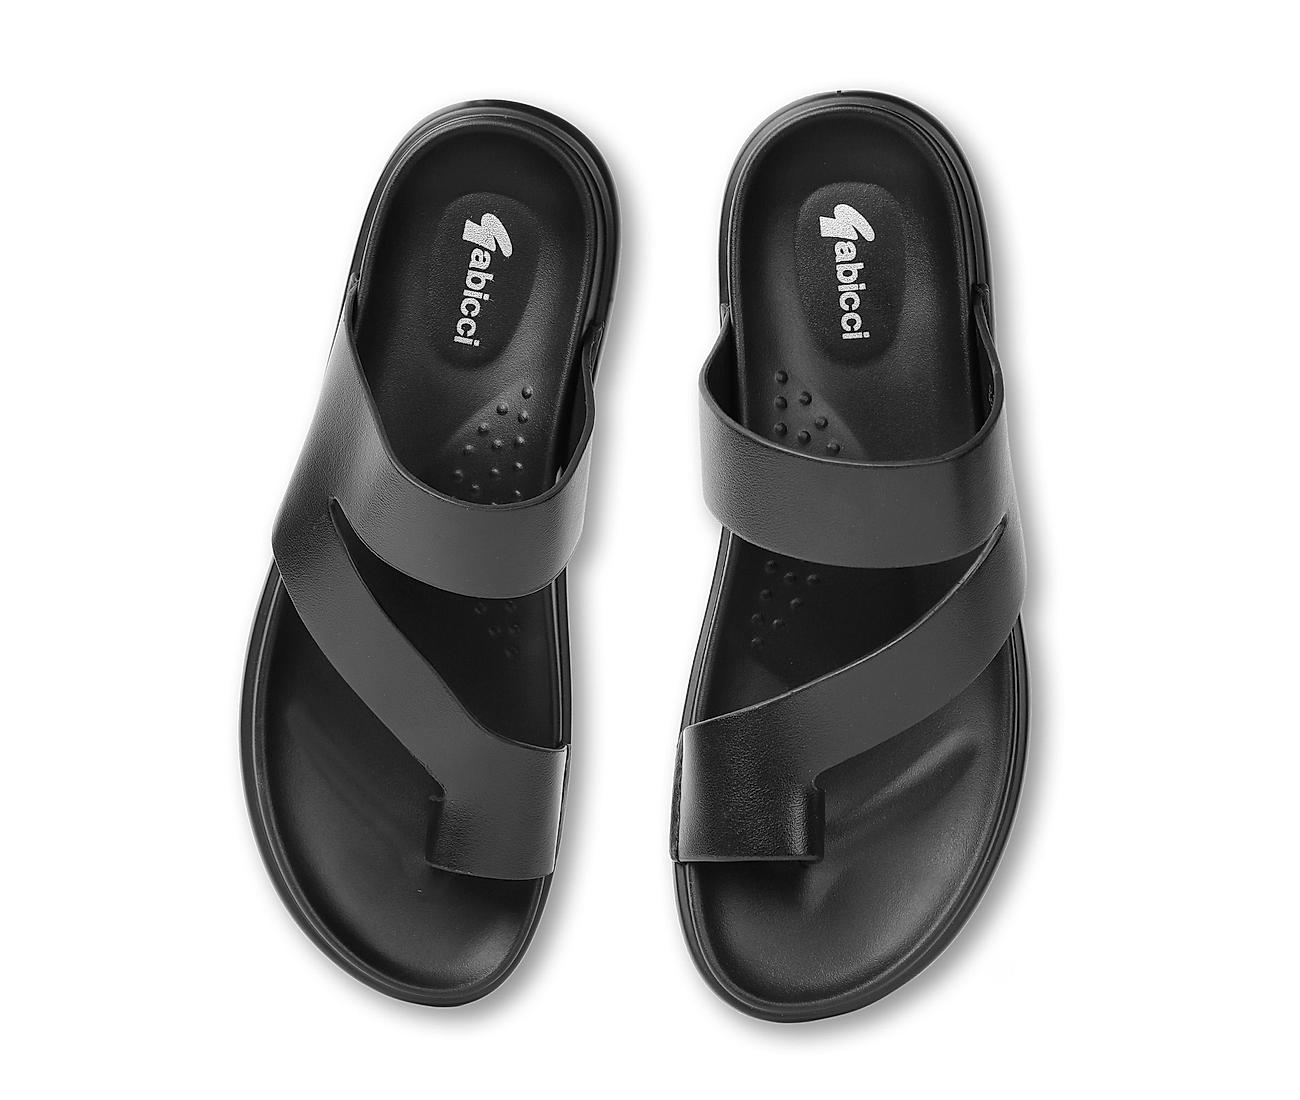 Rubber Sandals Top Sellers - www.puzzlewood.net 1694970015